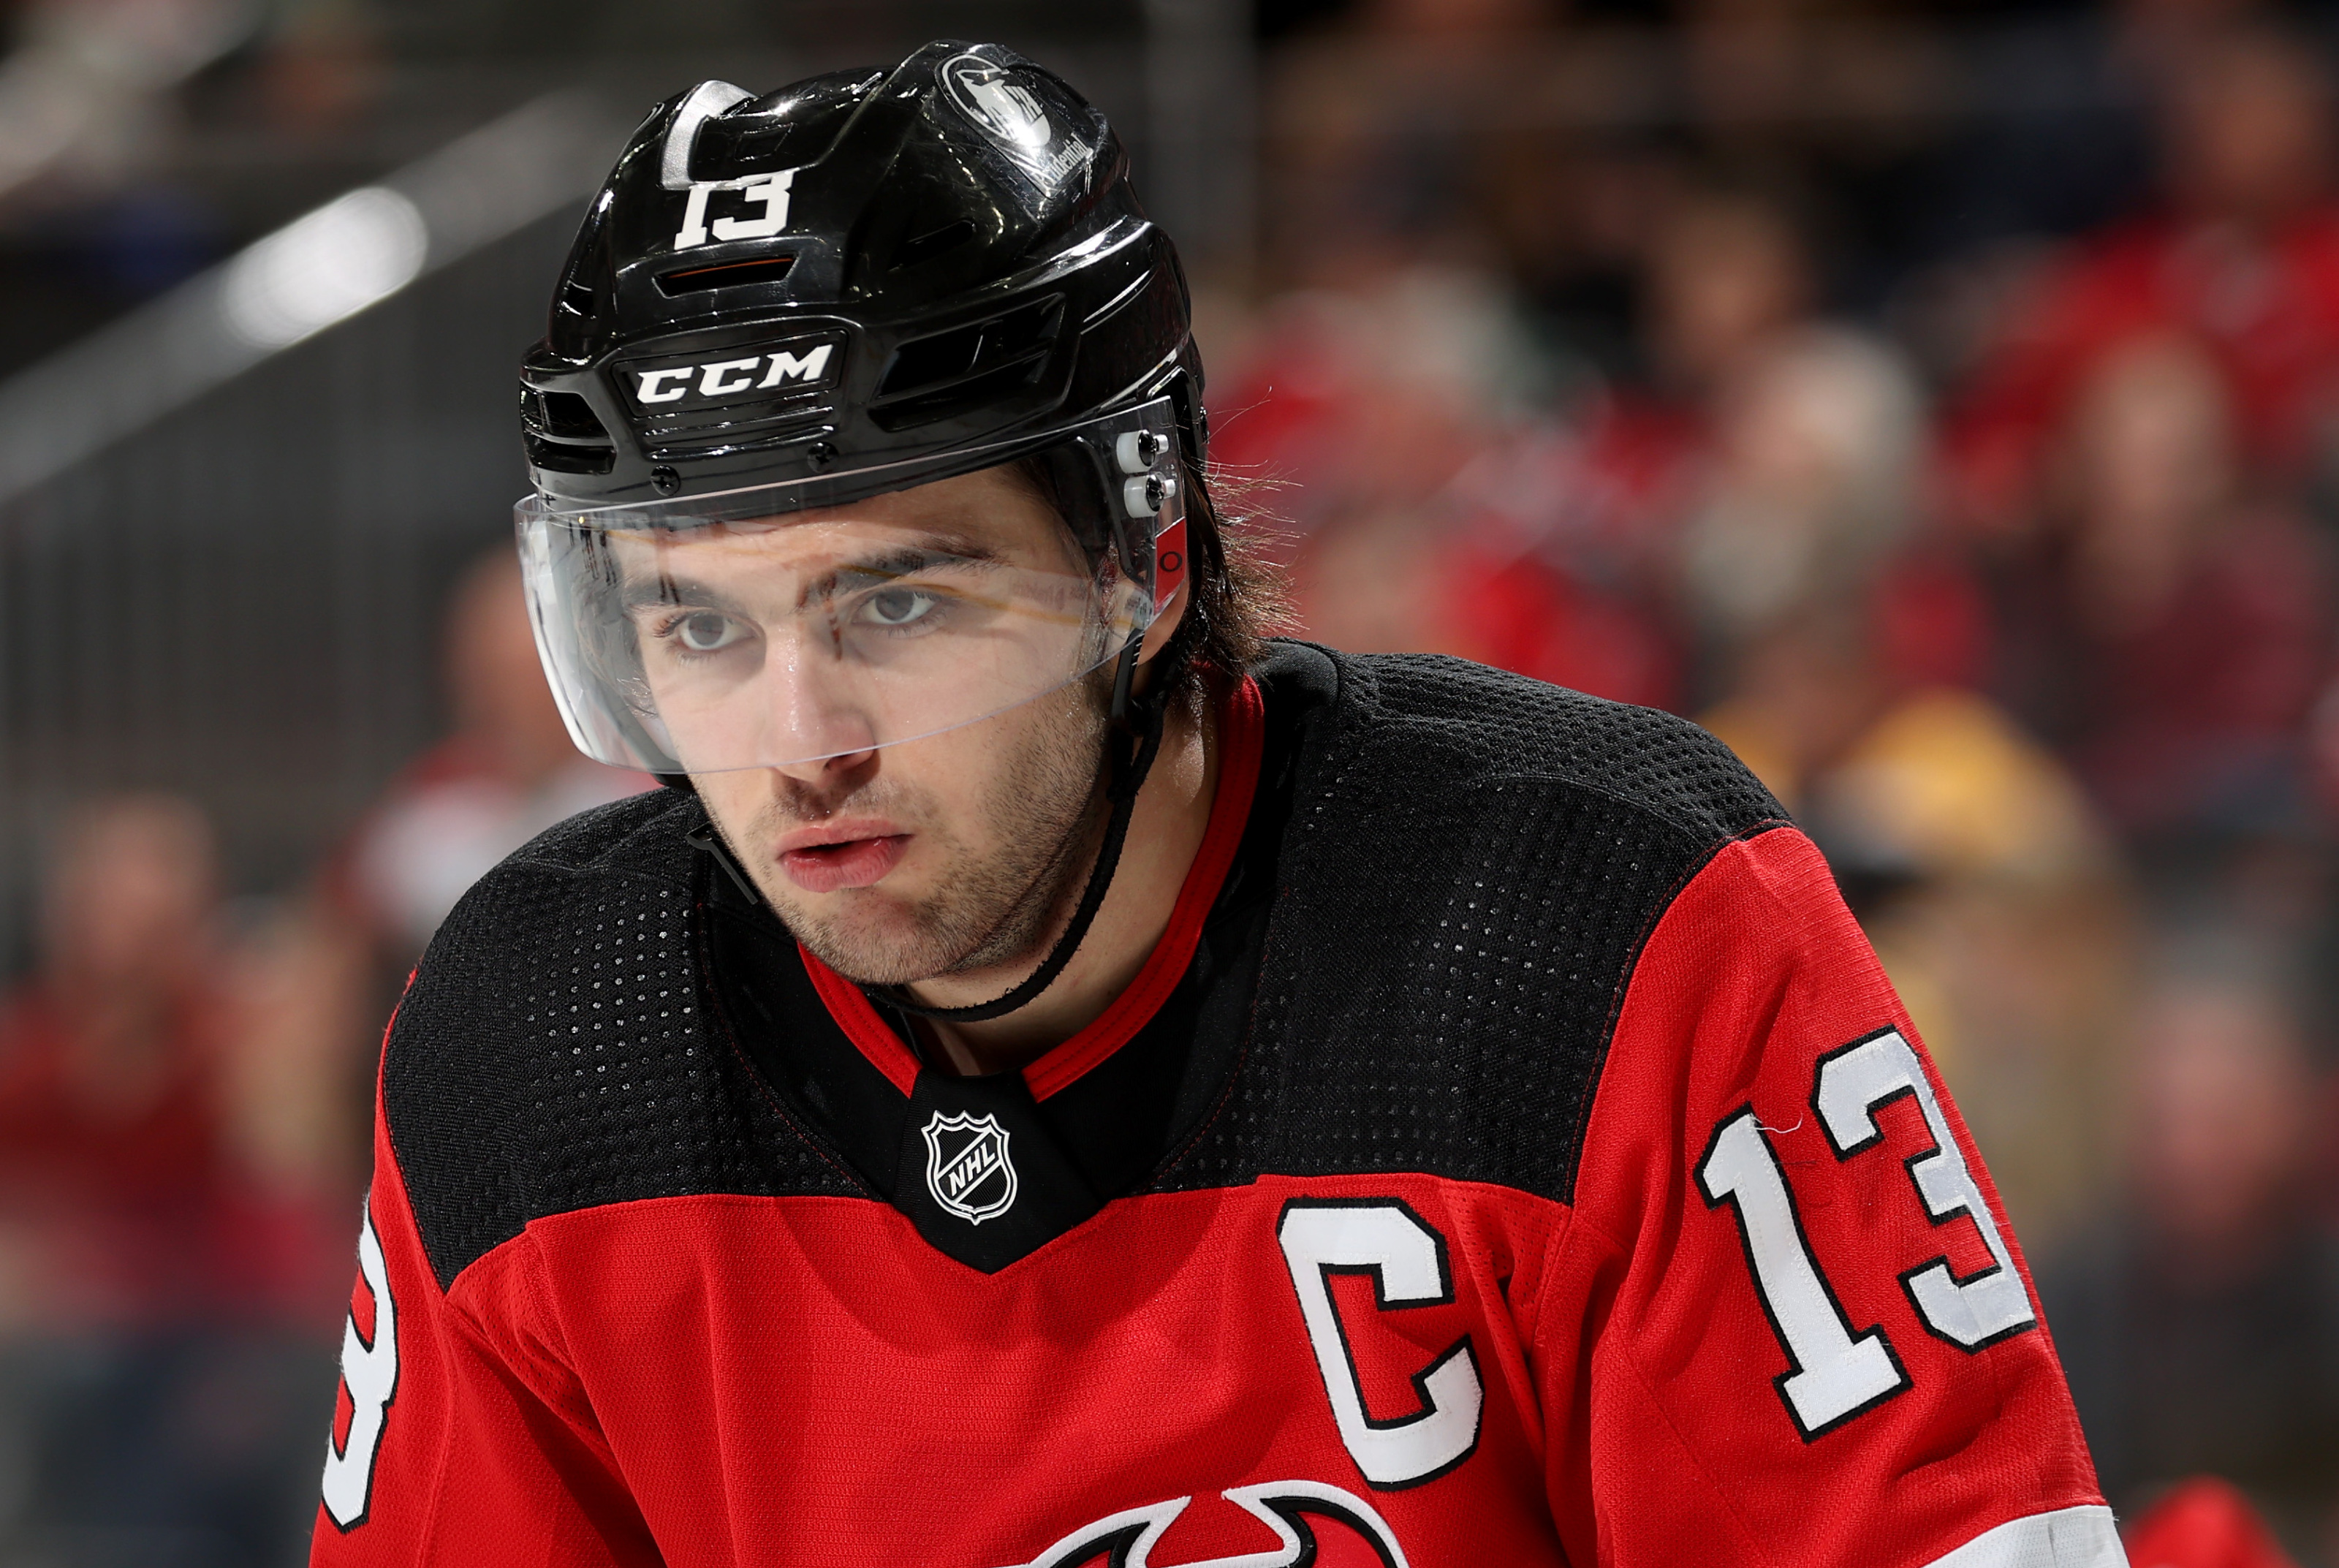 Nico Hischier OT Winner Saved New Jersey Devils from Choking to Arizona  Coyotes - All About The Jersey